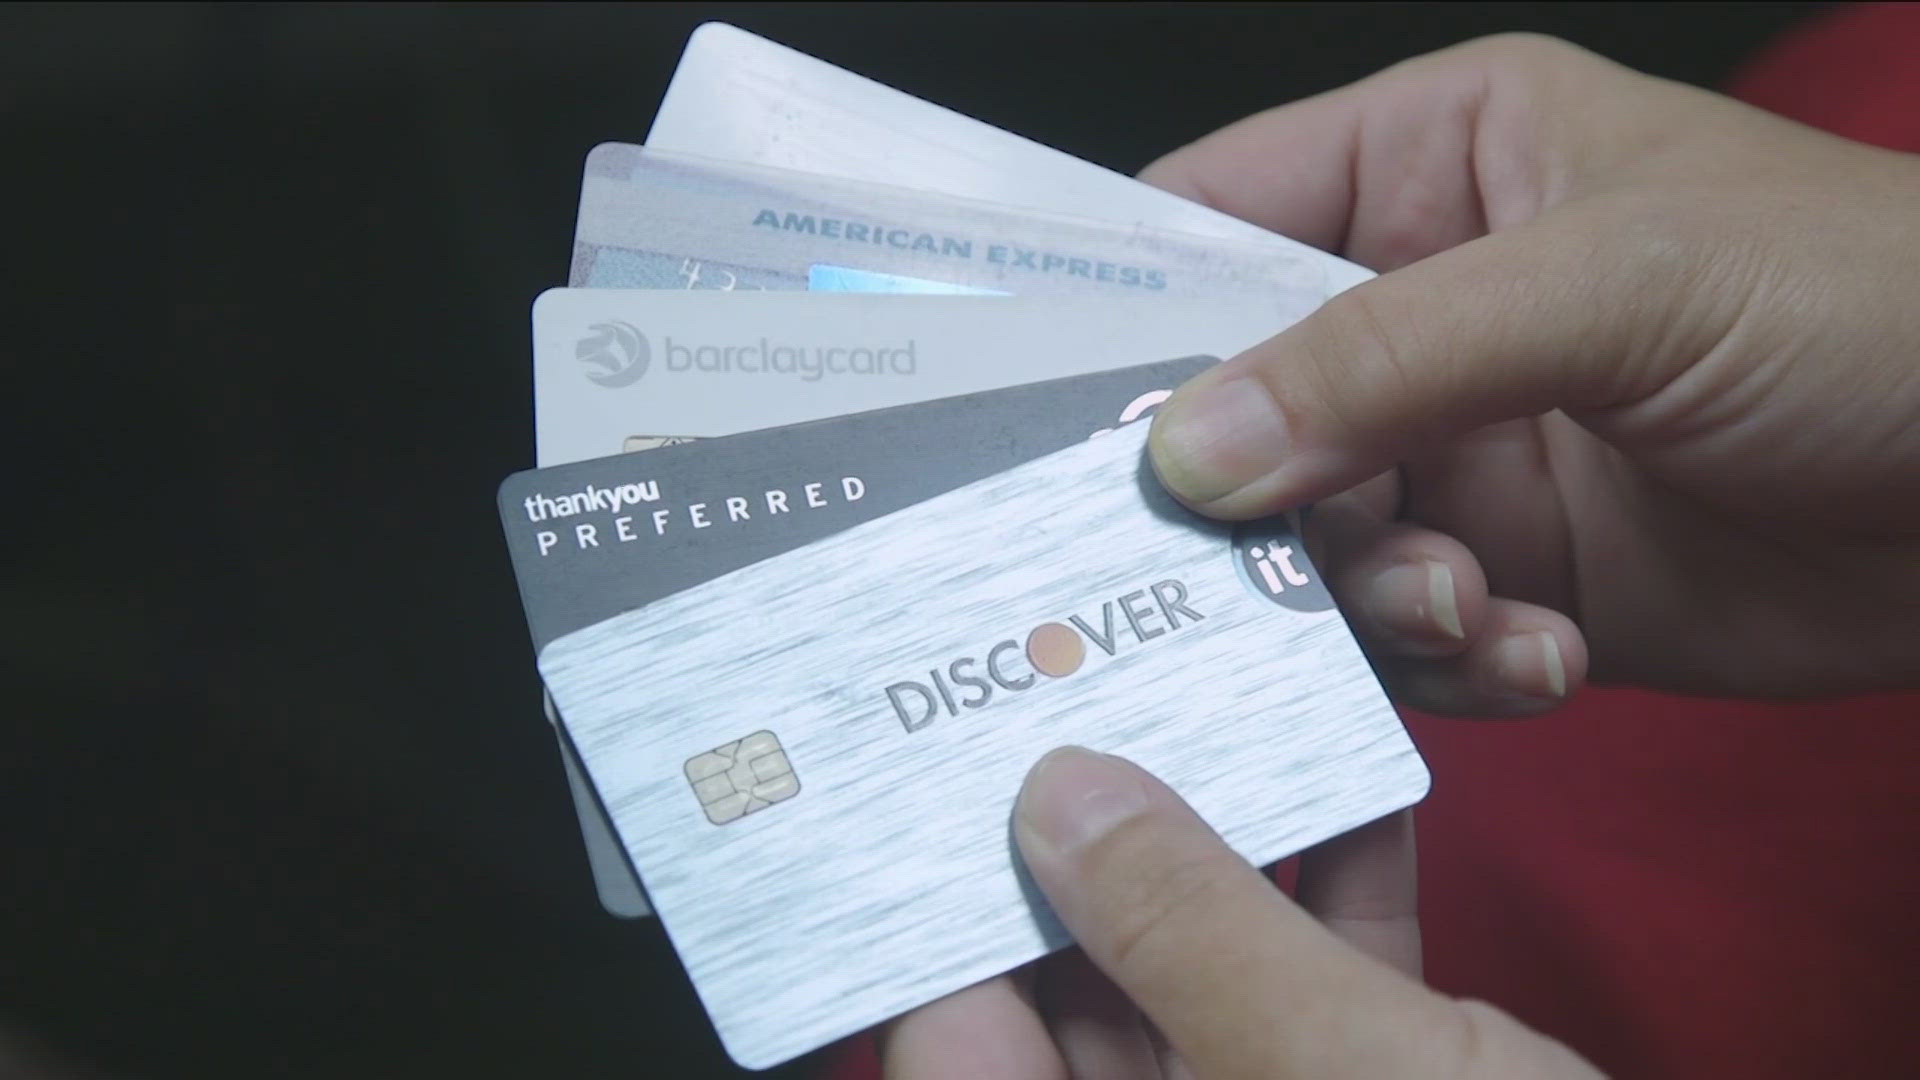 Consumer Reports analyzes the cards with the best perks, from airline miles to money back and more.